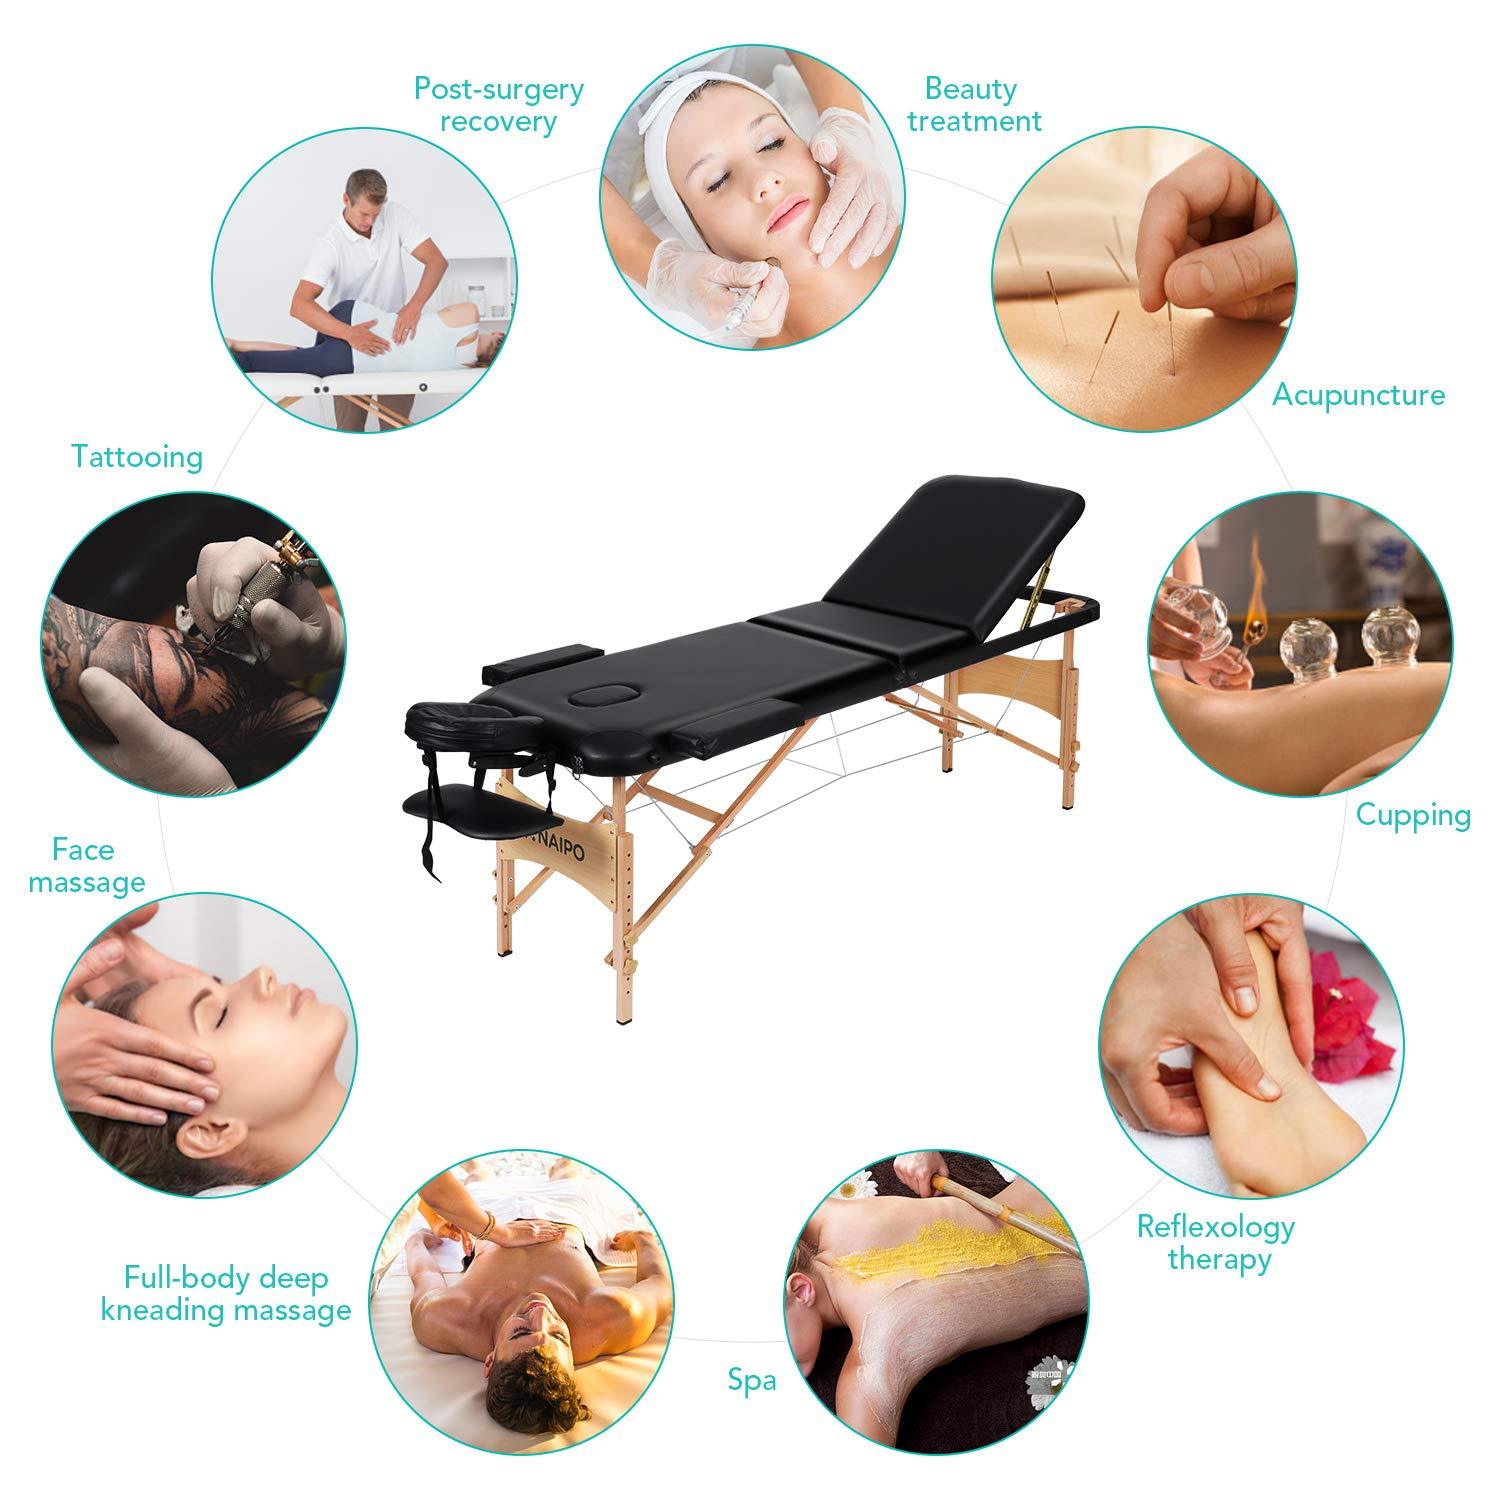 Load image into Gallery viewer, Naipo Portable Massage Table Professional Adjustable Folding Bed with 3 Sections Wooden Frame Ergonomic Headrest and Carrying Bag for Therapy Tattoo Salon Spa Facial Treatment - NAIPO
